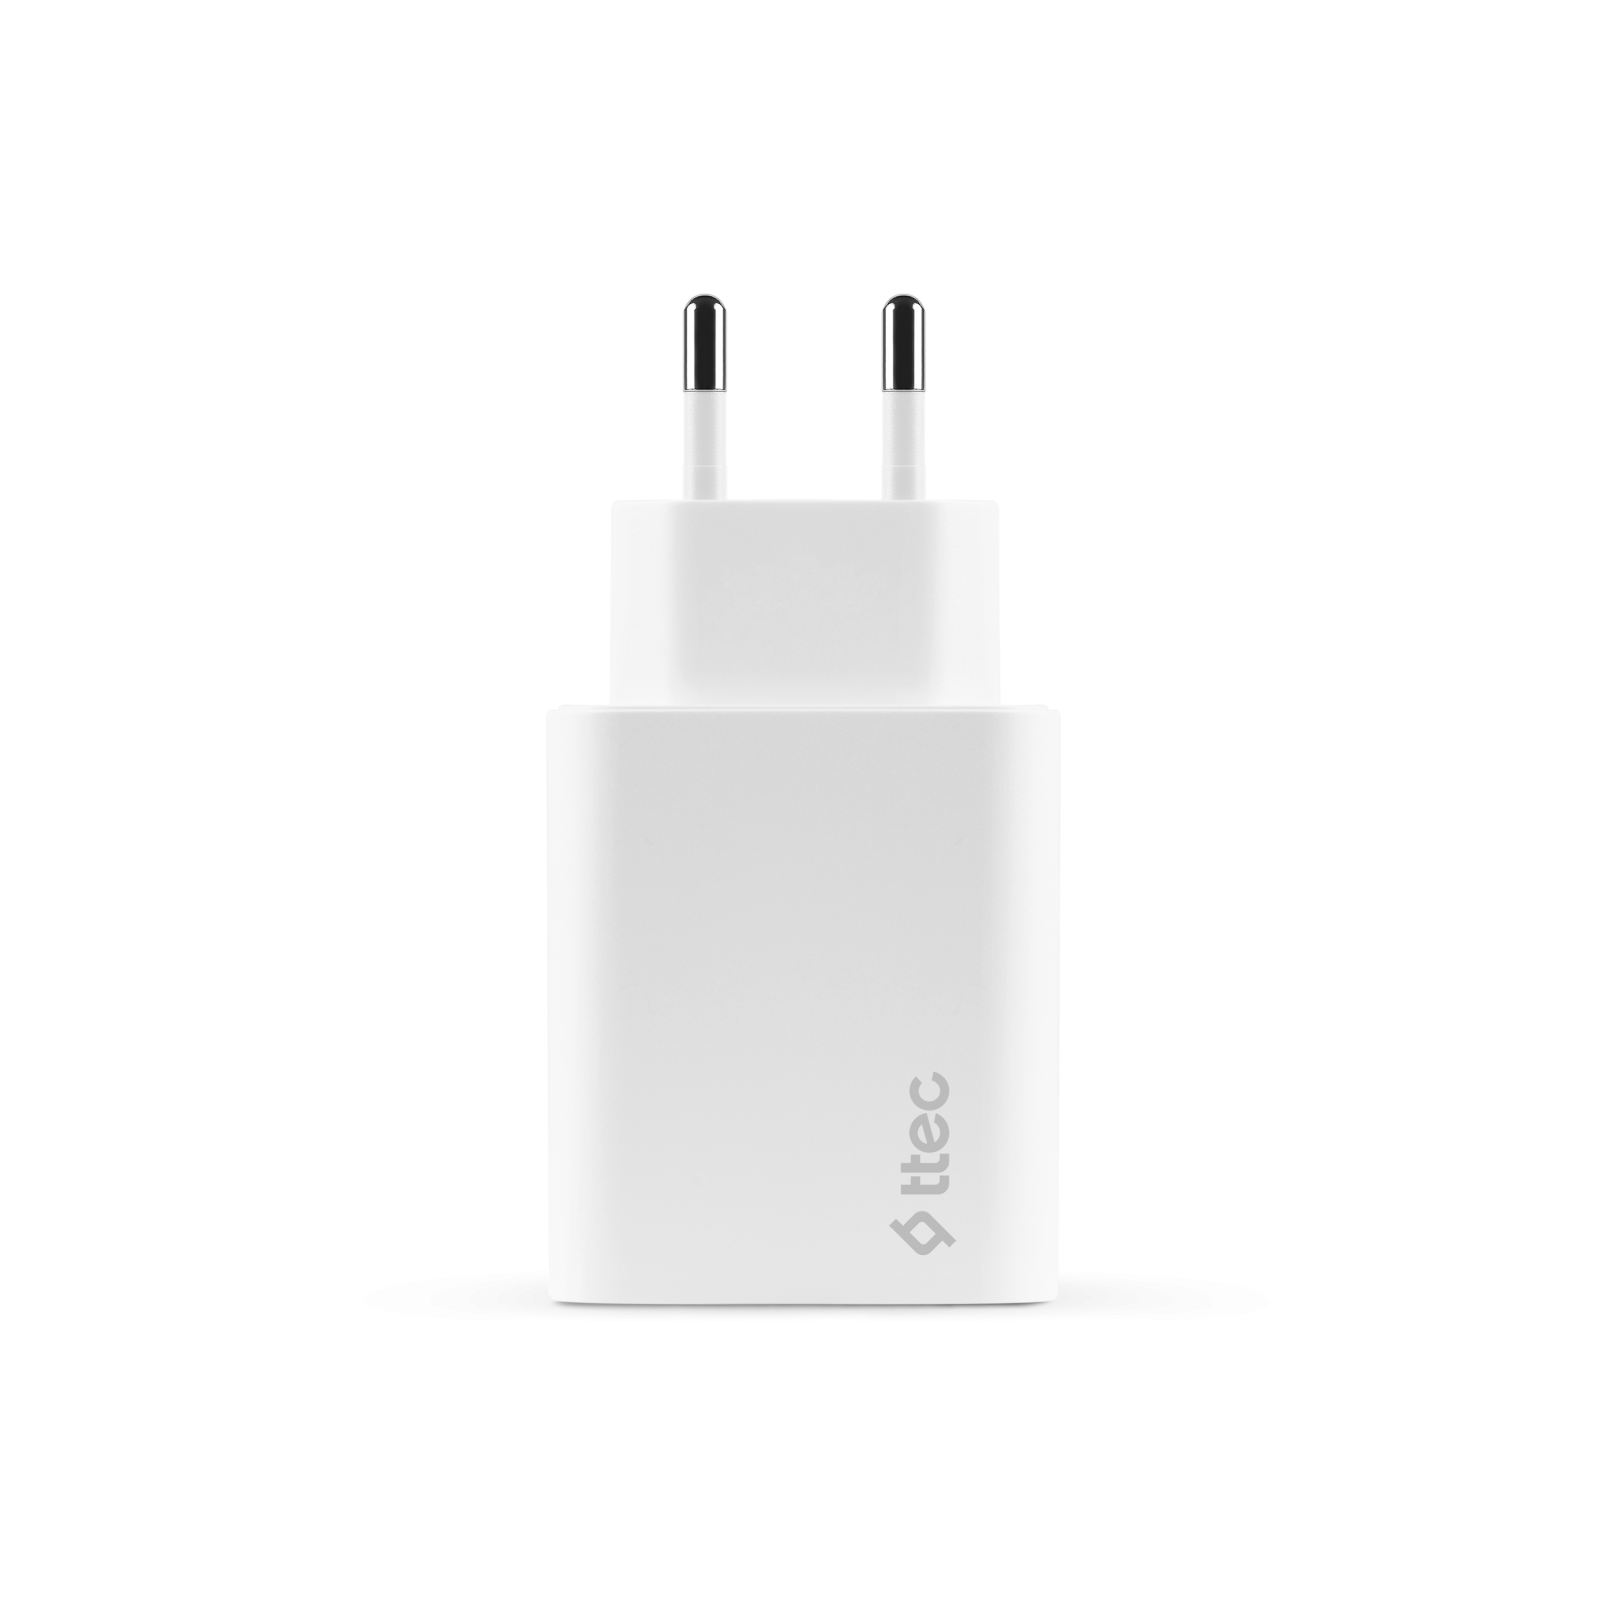 Адаптер 220V ttec SmartCharger Duo USB-C+USB-A Travel Charger 2.4 A - Бял